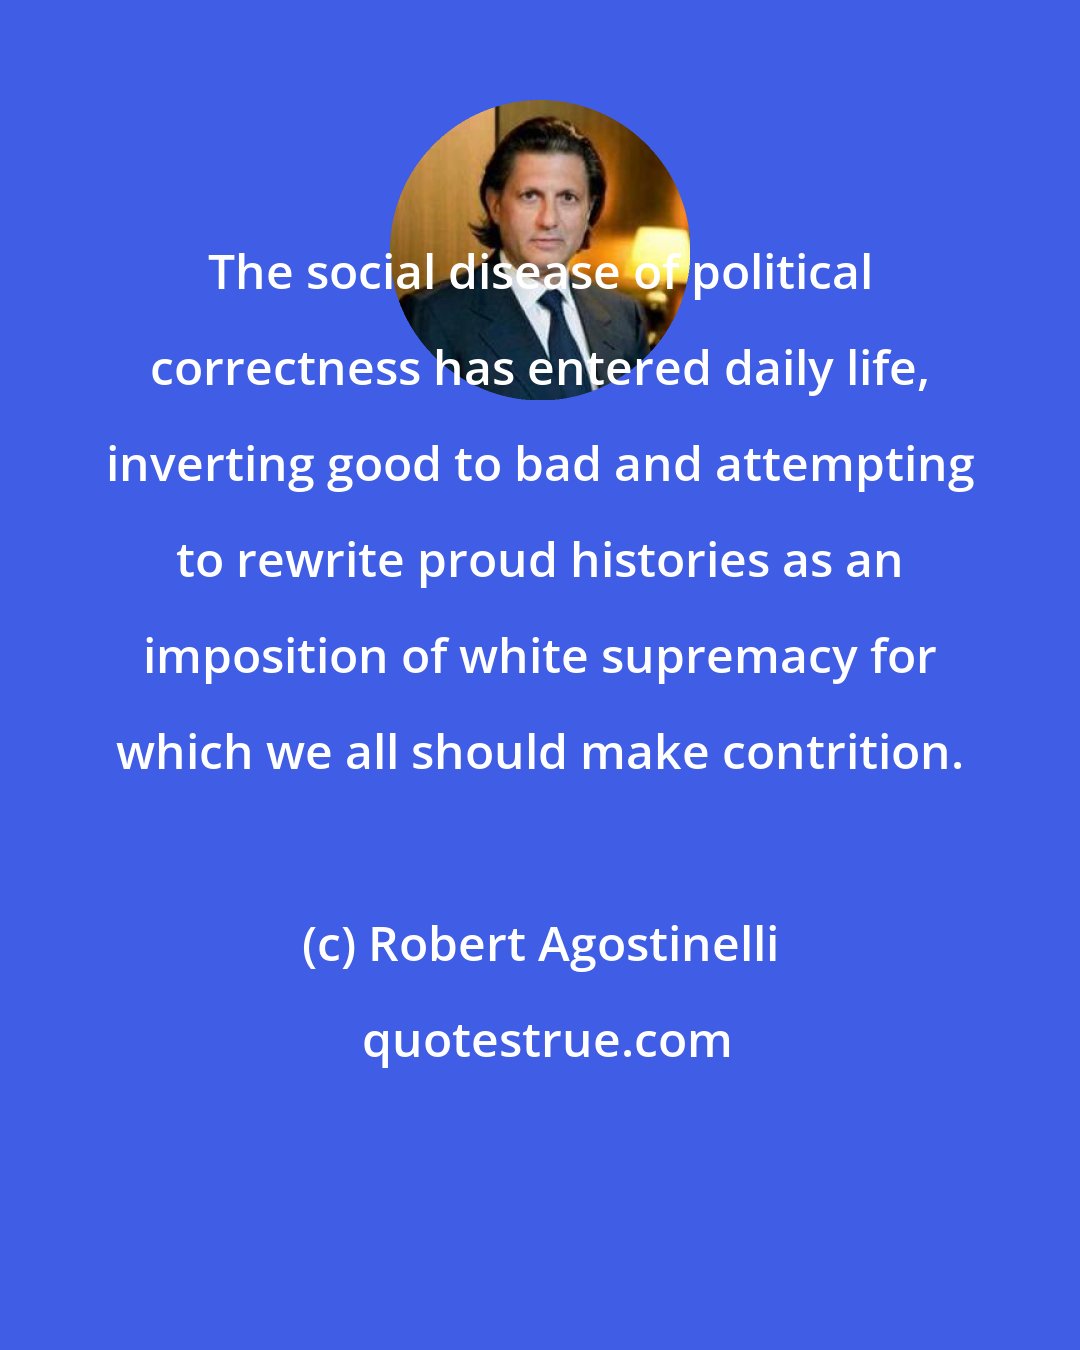 Robert Agostinelli: The social disease of political correctness has entered daily life, inverting good to bad and attempting to rewrite proud histories as an imposition of white supremacy for which we all should make contrition.